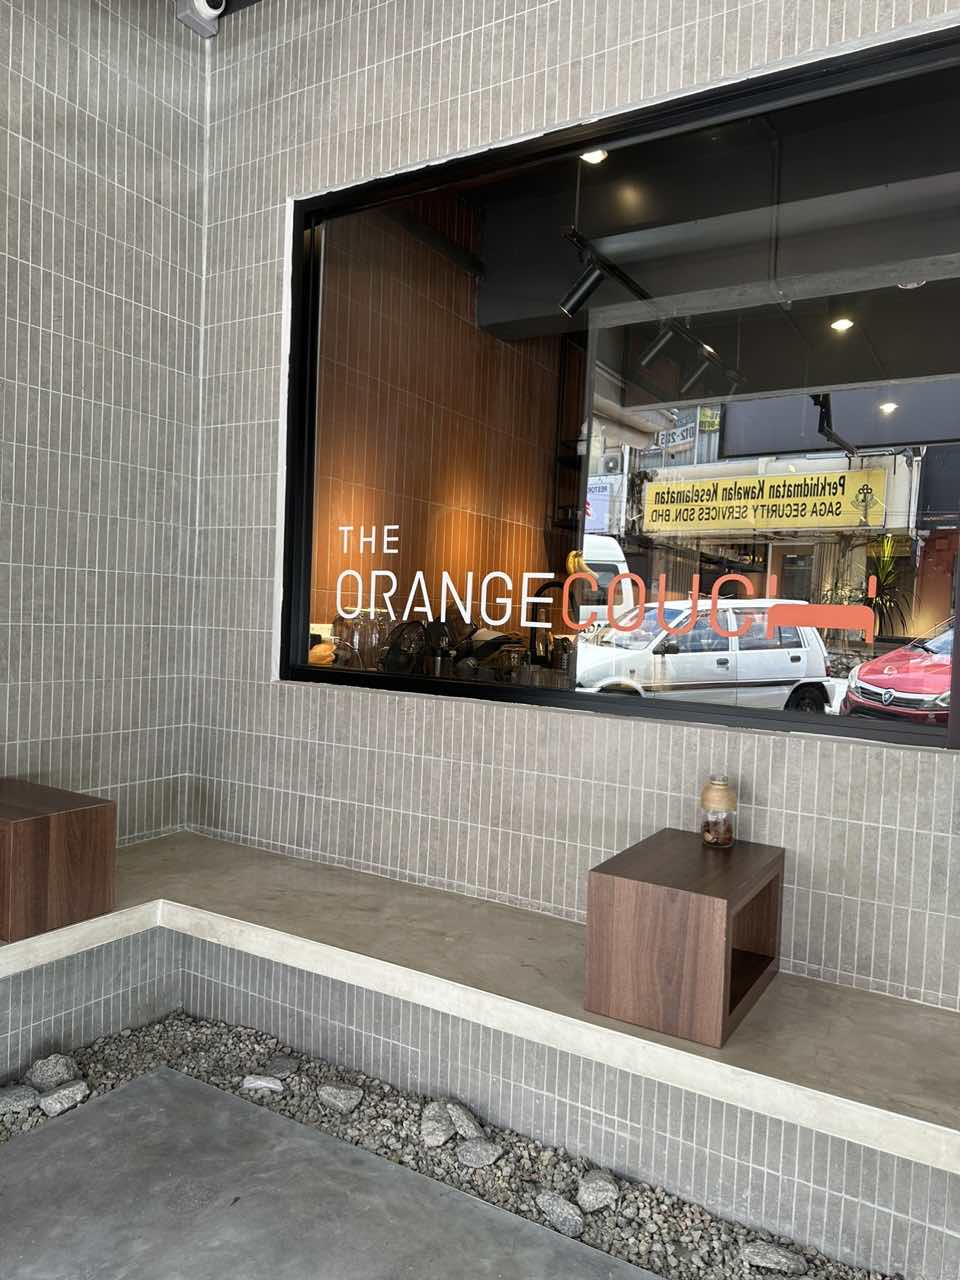 The orange couch cafe in ss15